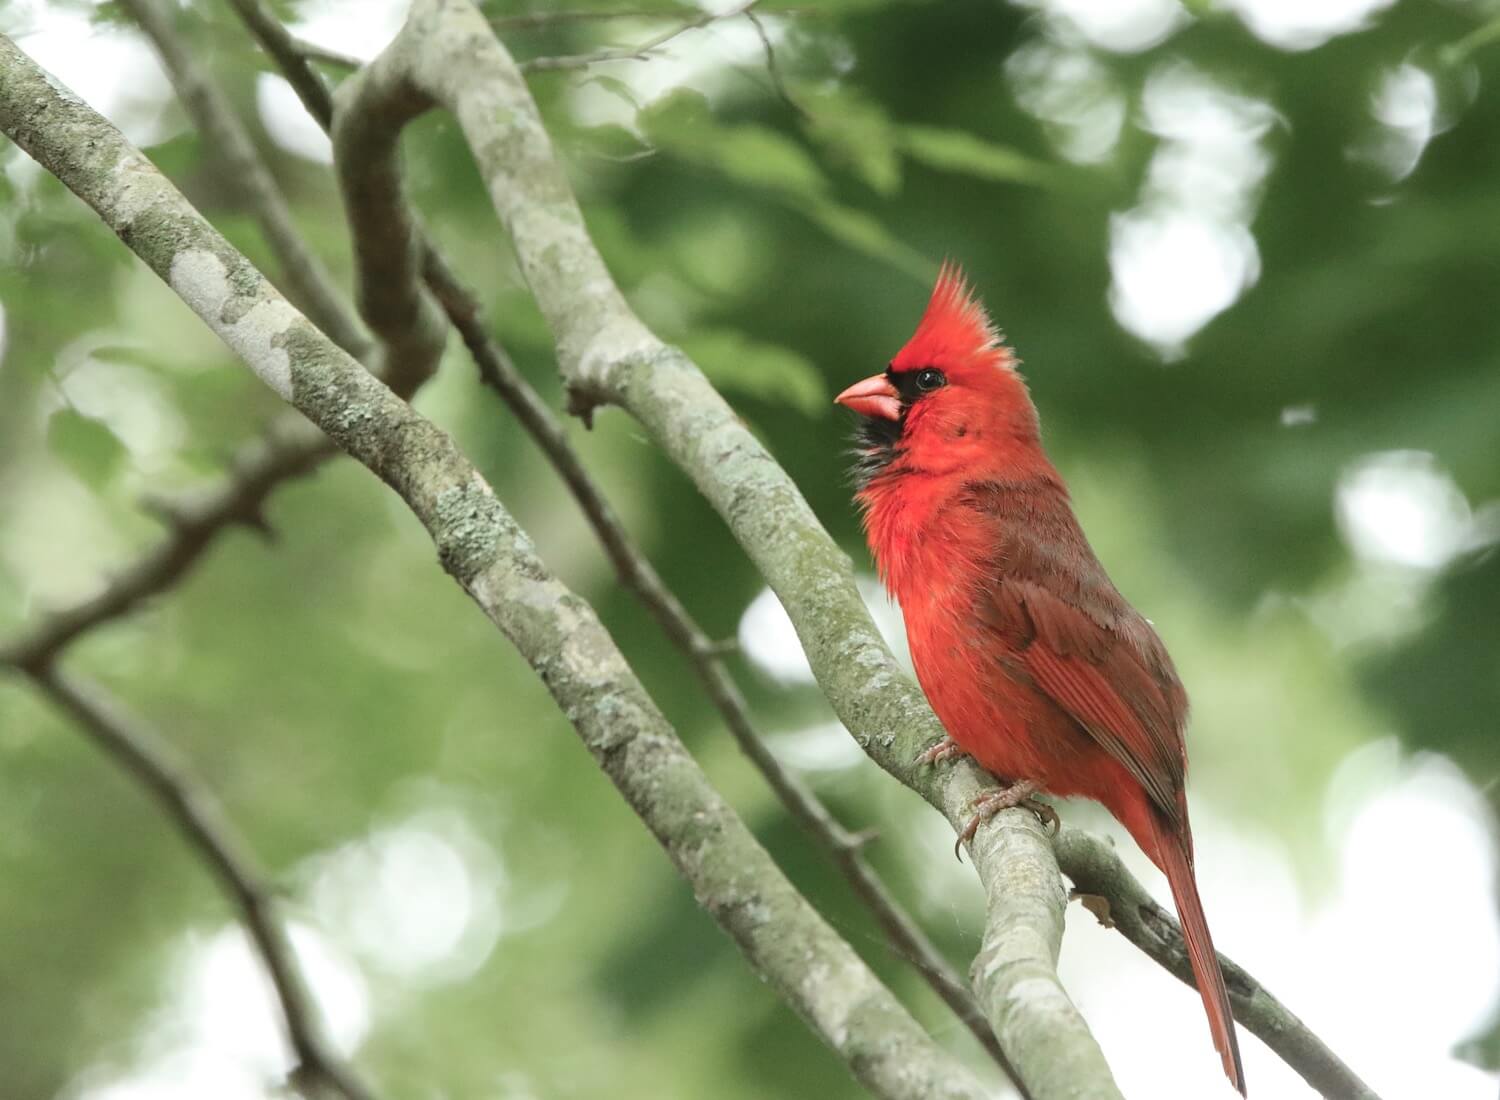 Close-up of red cardinal standing on tree branch.